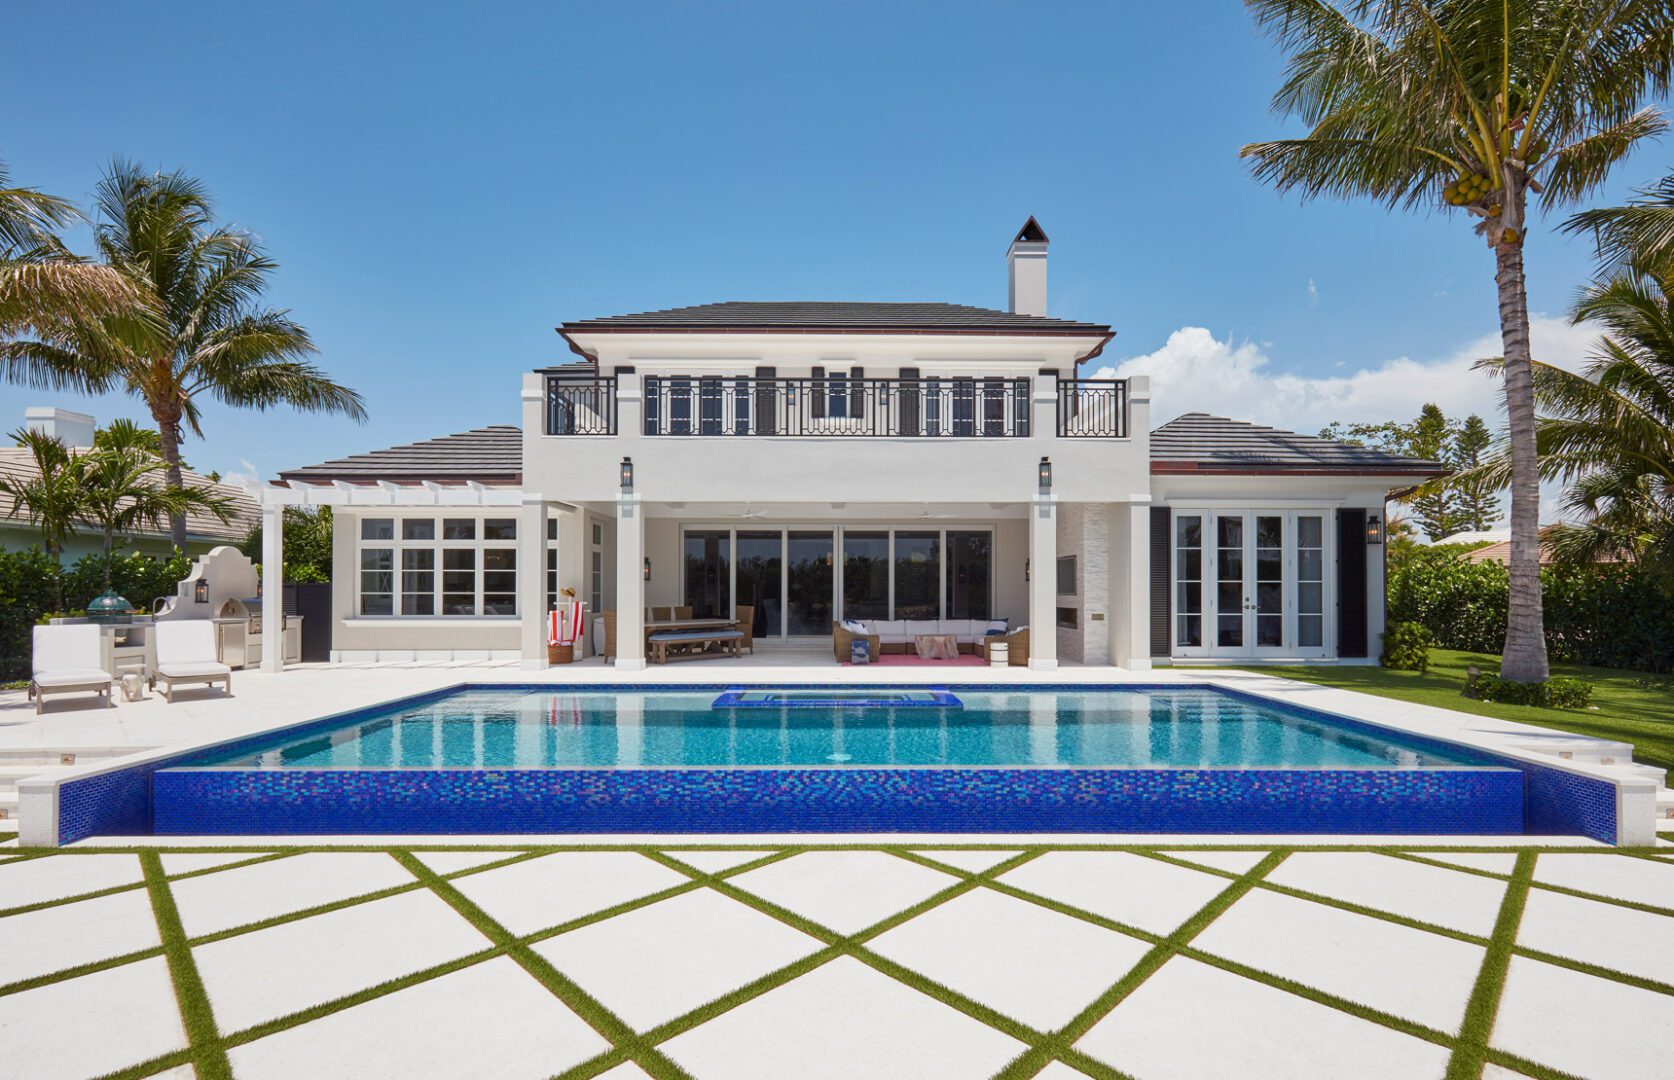 A large white house with a pool in the middle of it.